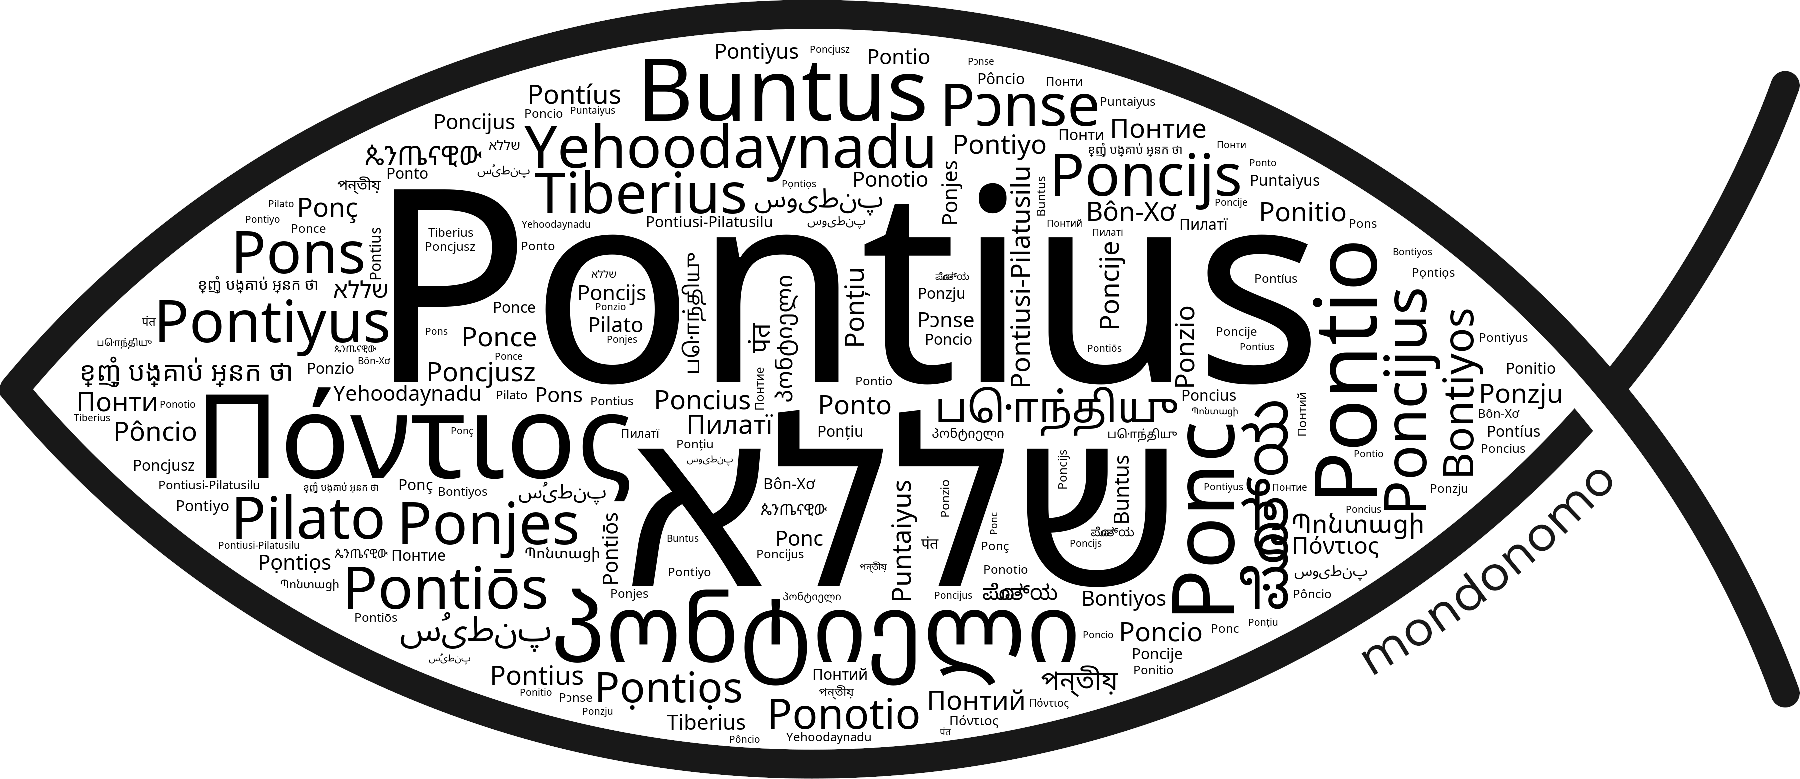 Name Pontius in the world's Bibles